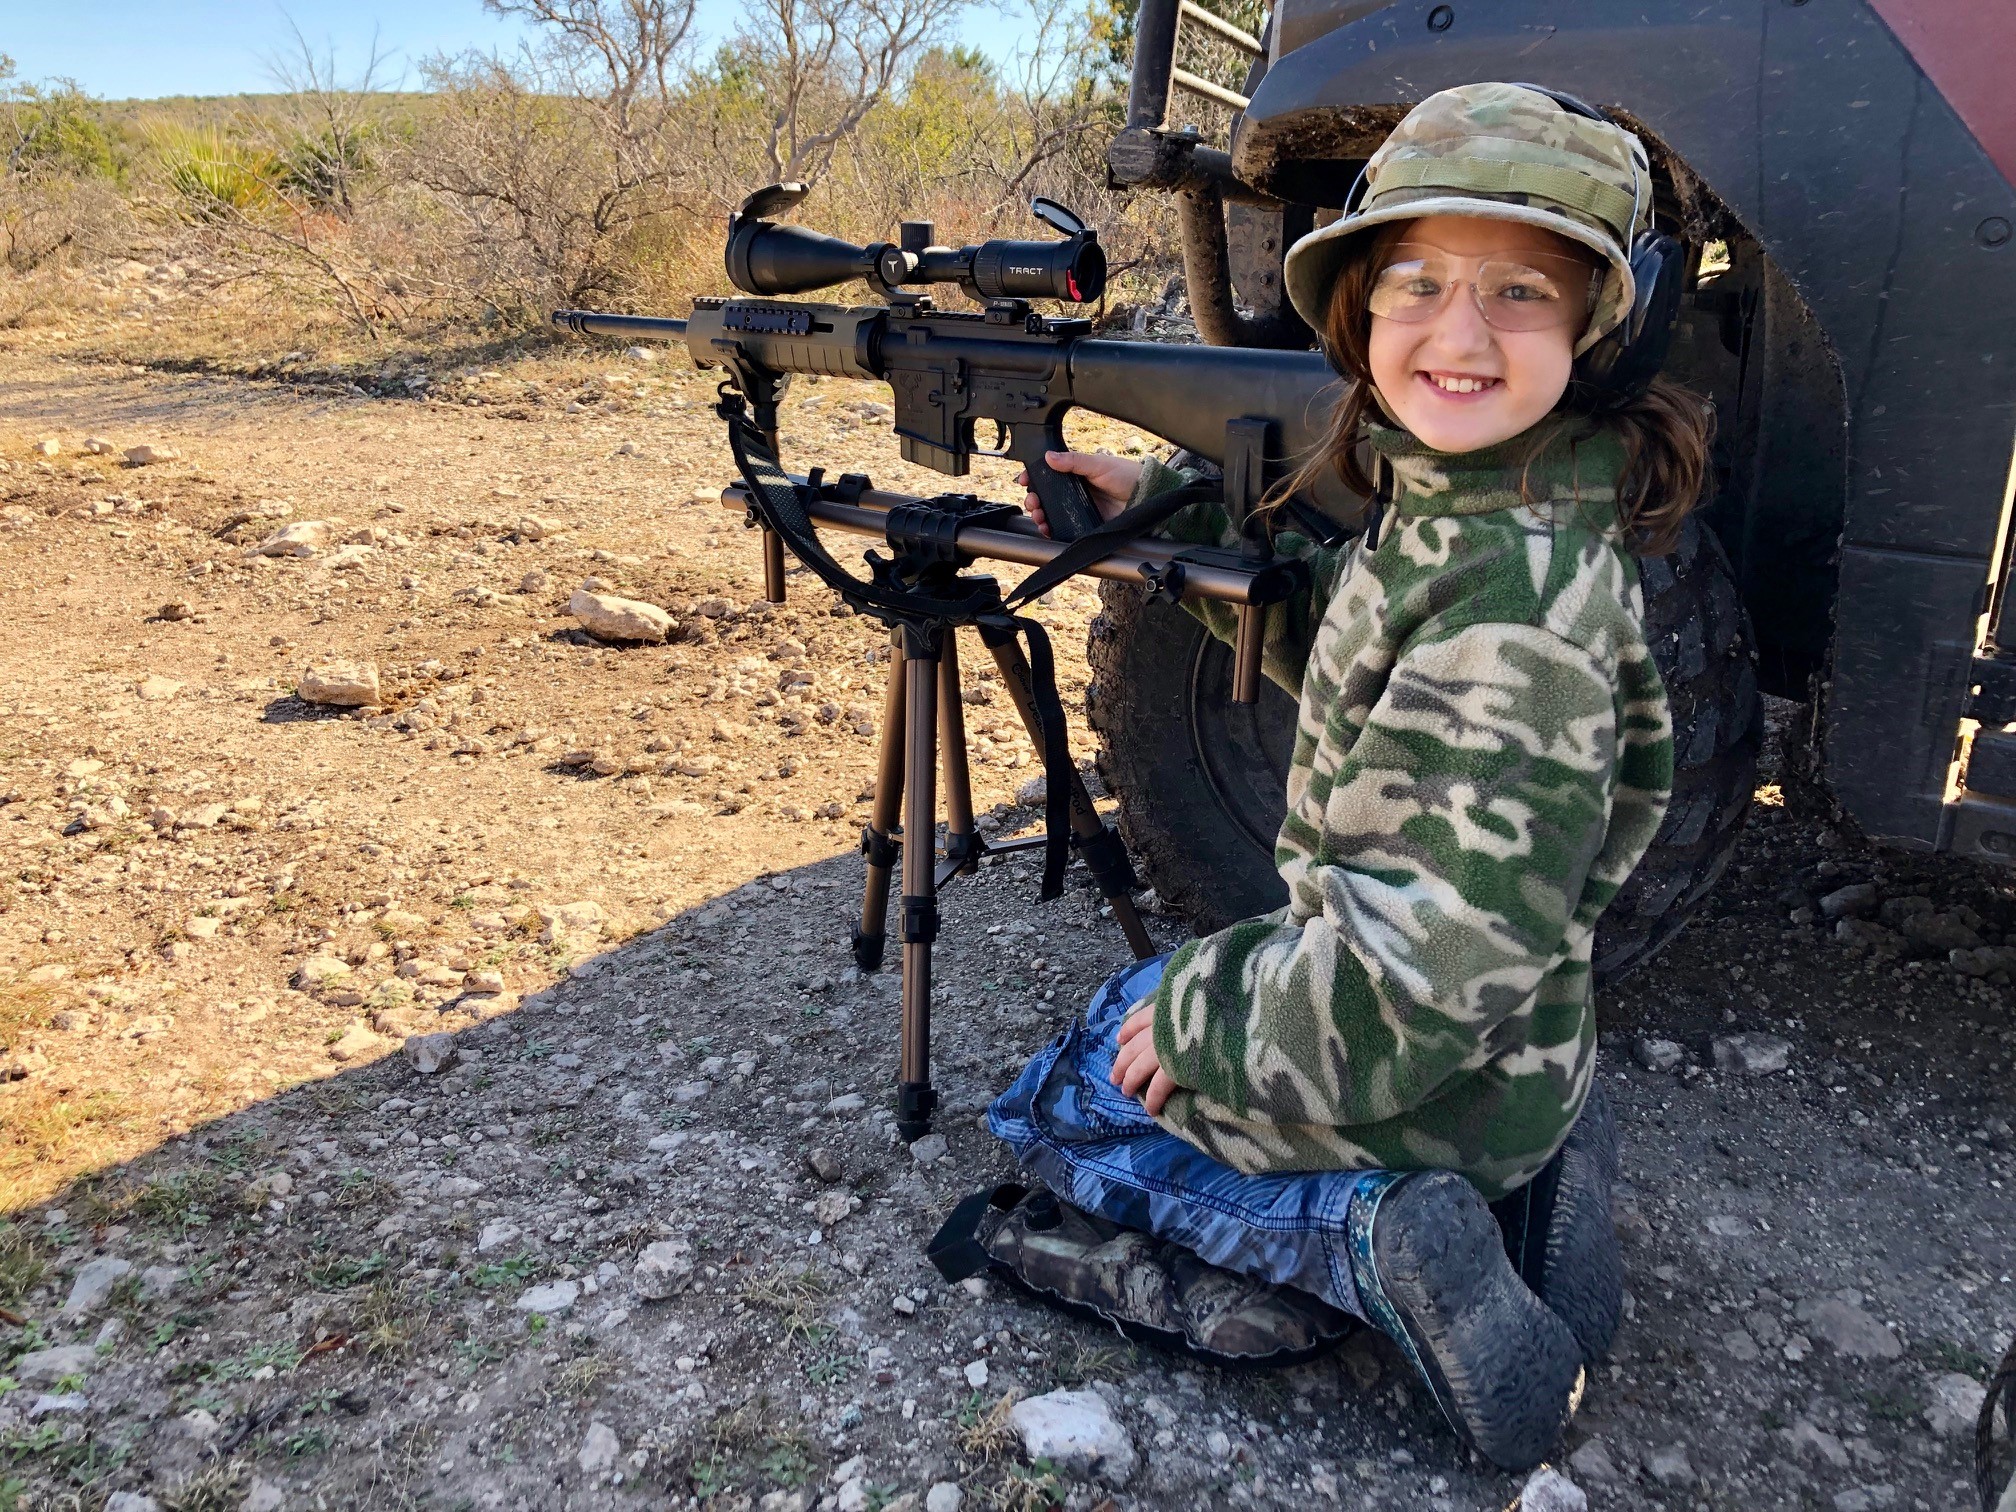 Getting Kids Into Hunting